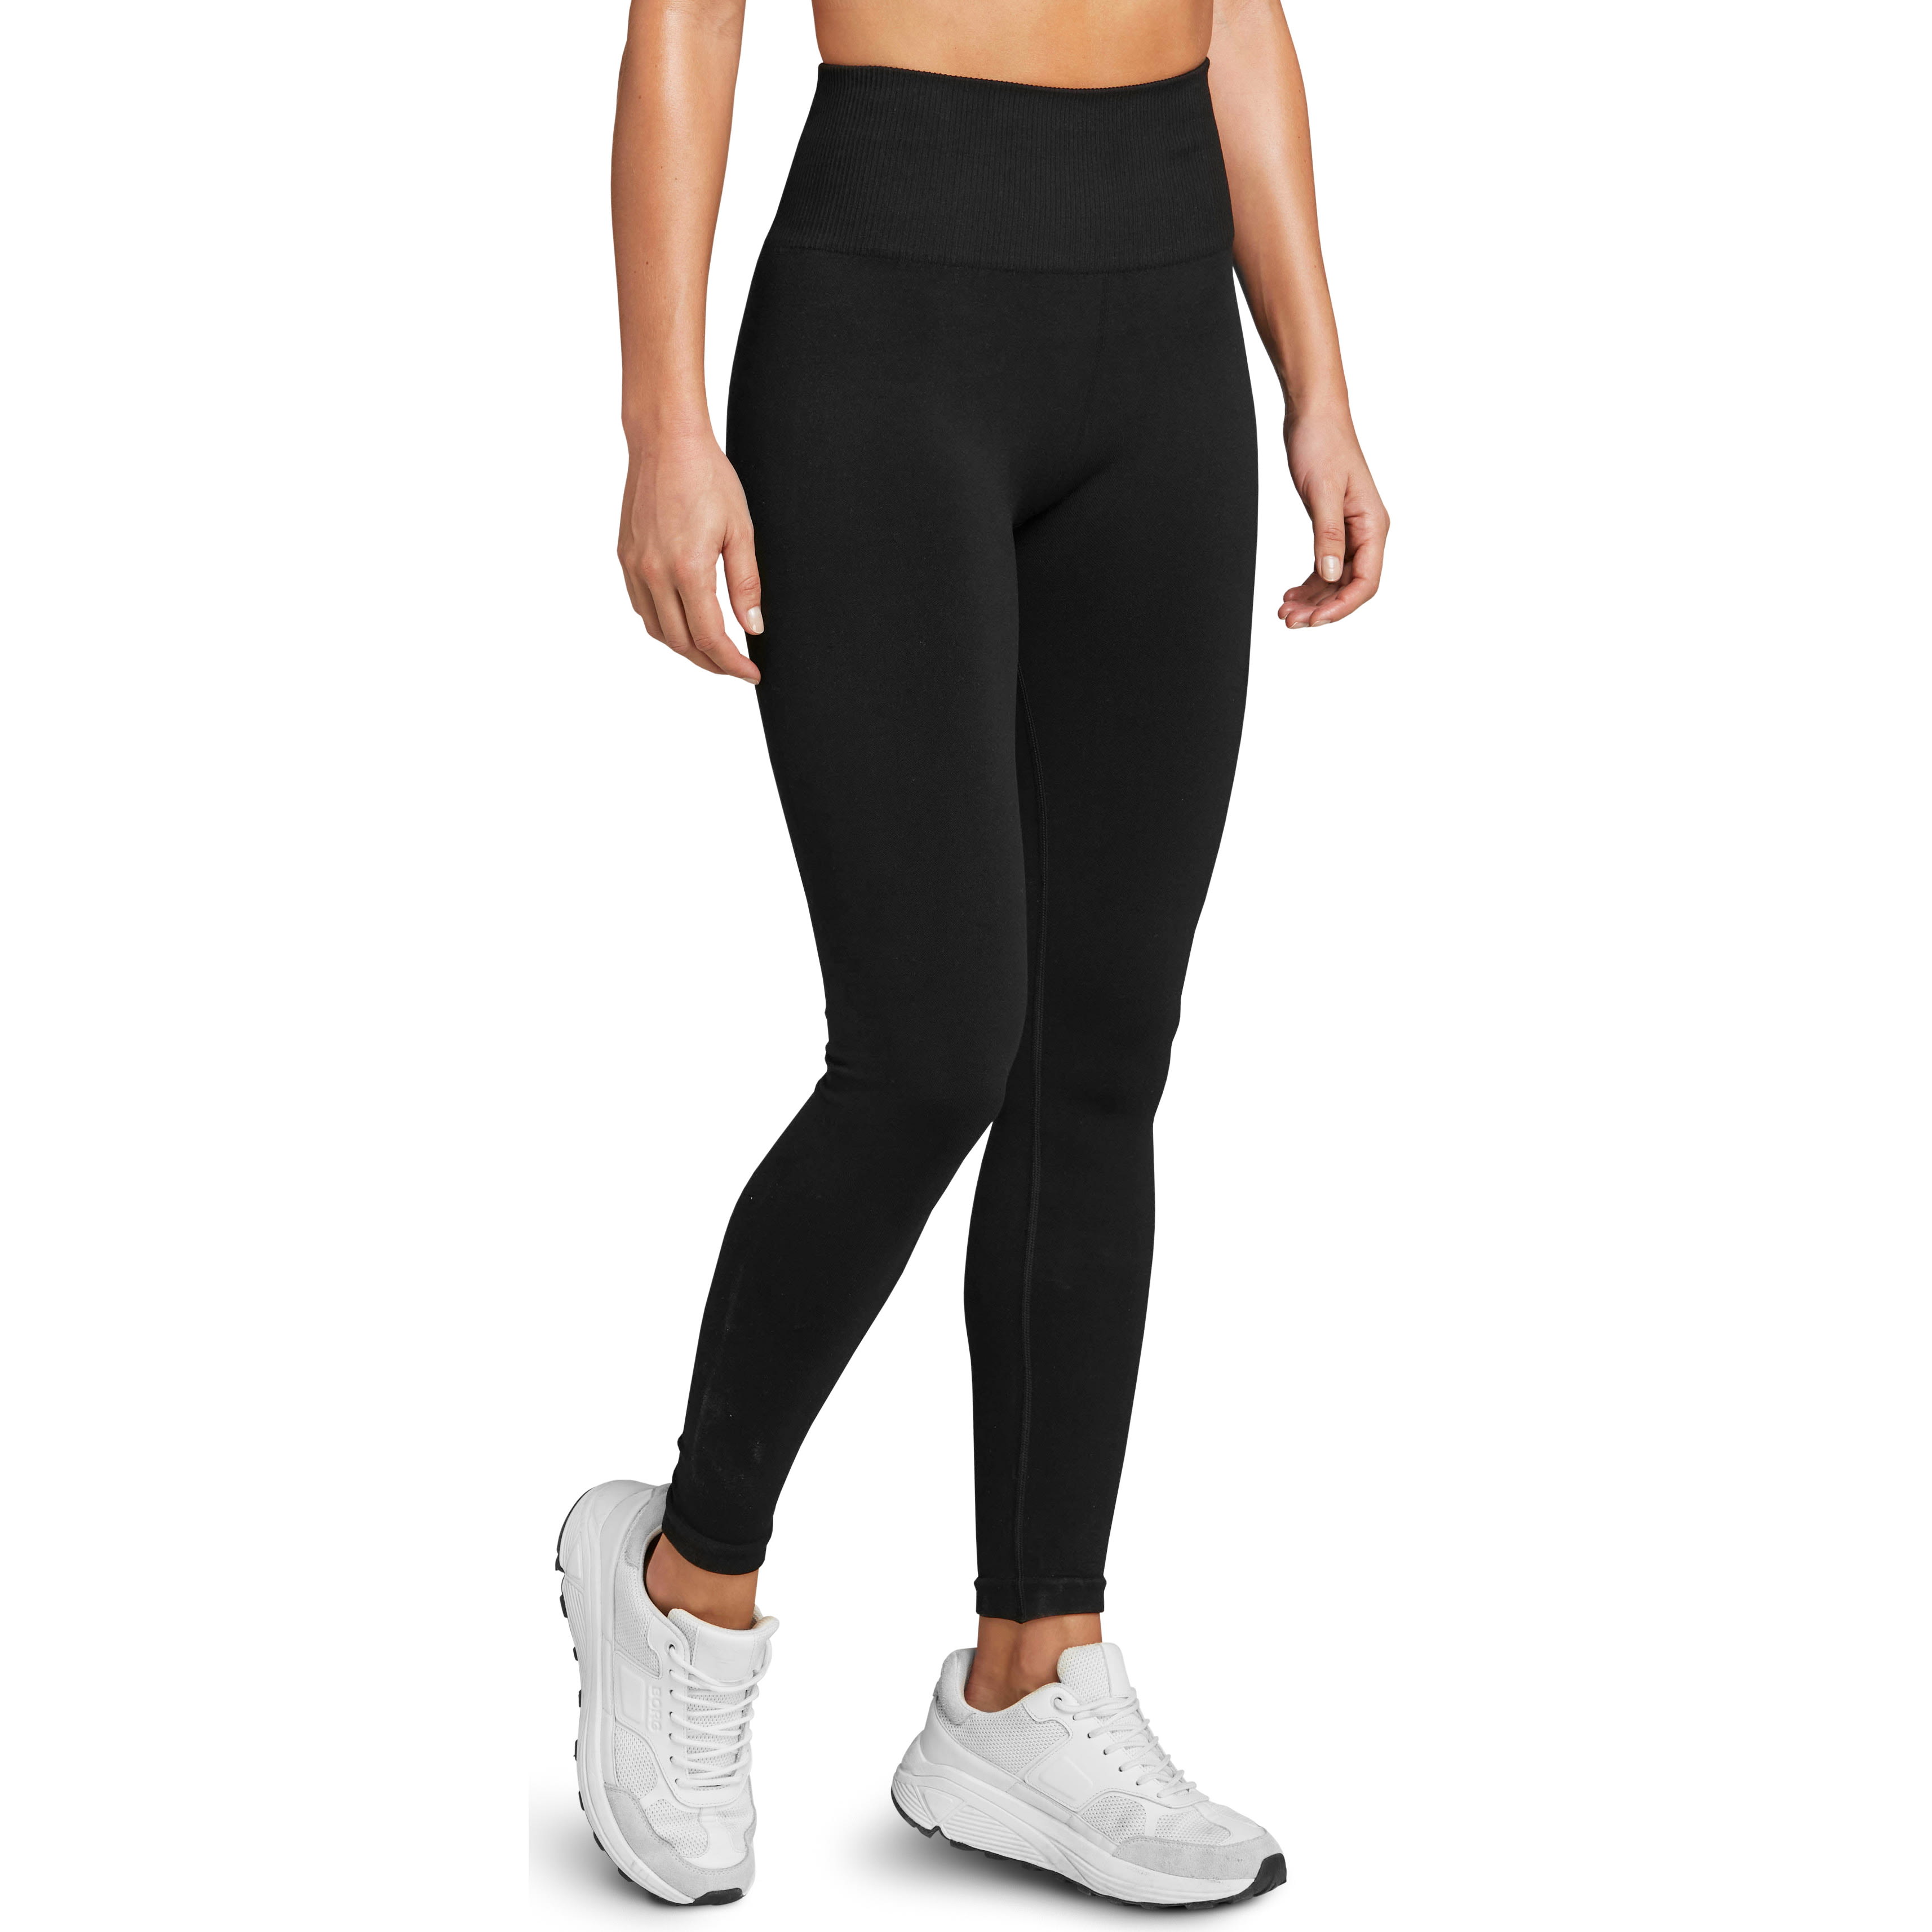 PapoeaNieuwGuinea Eik Beg Buy Björn Borg Women's Sthlm Seamless Tights from Outnorth